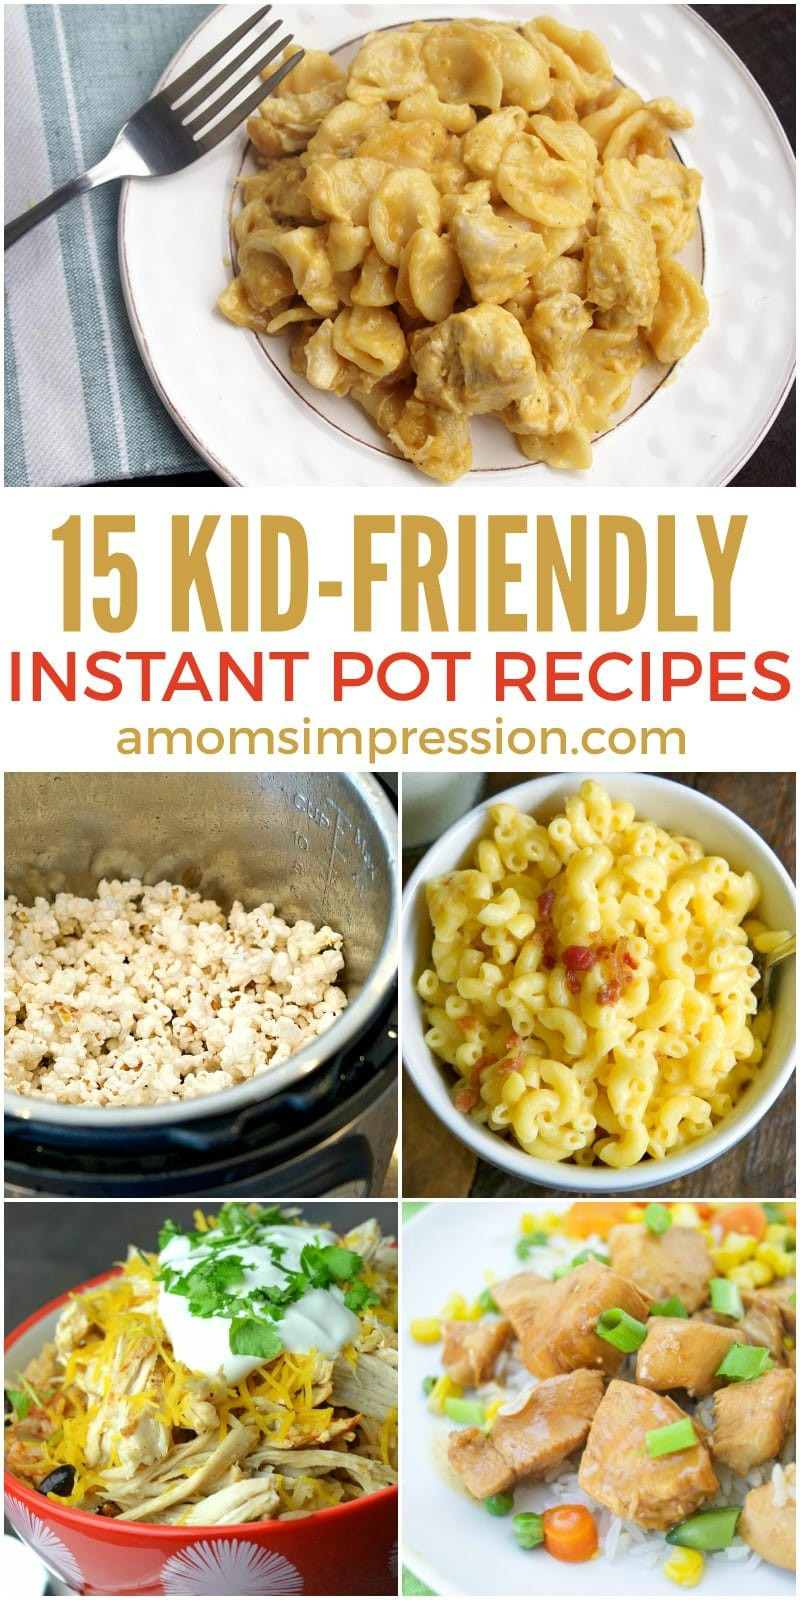 Quick Easy Recipes For Kids
 15 Quick and Easy Kid Friendly Instant Pot Recipes